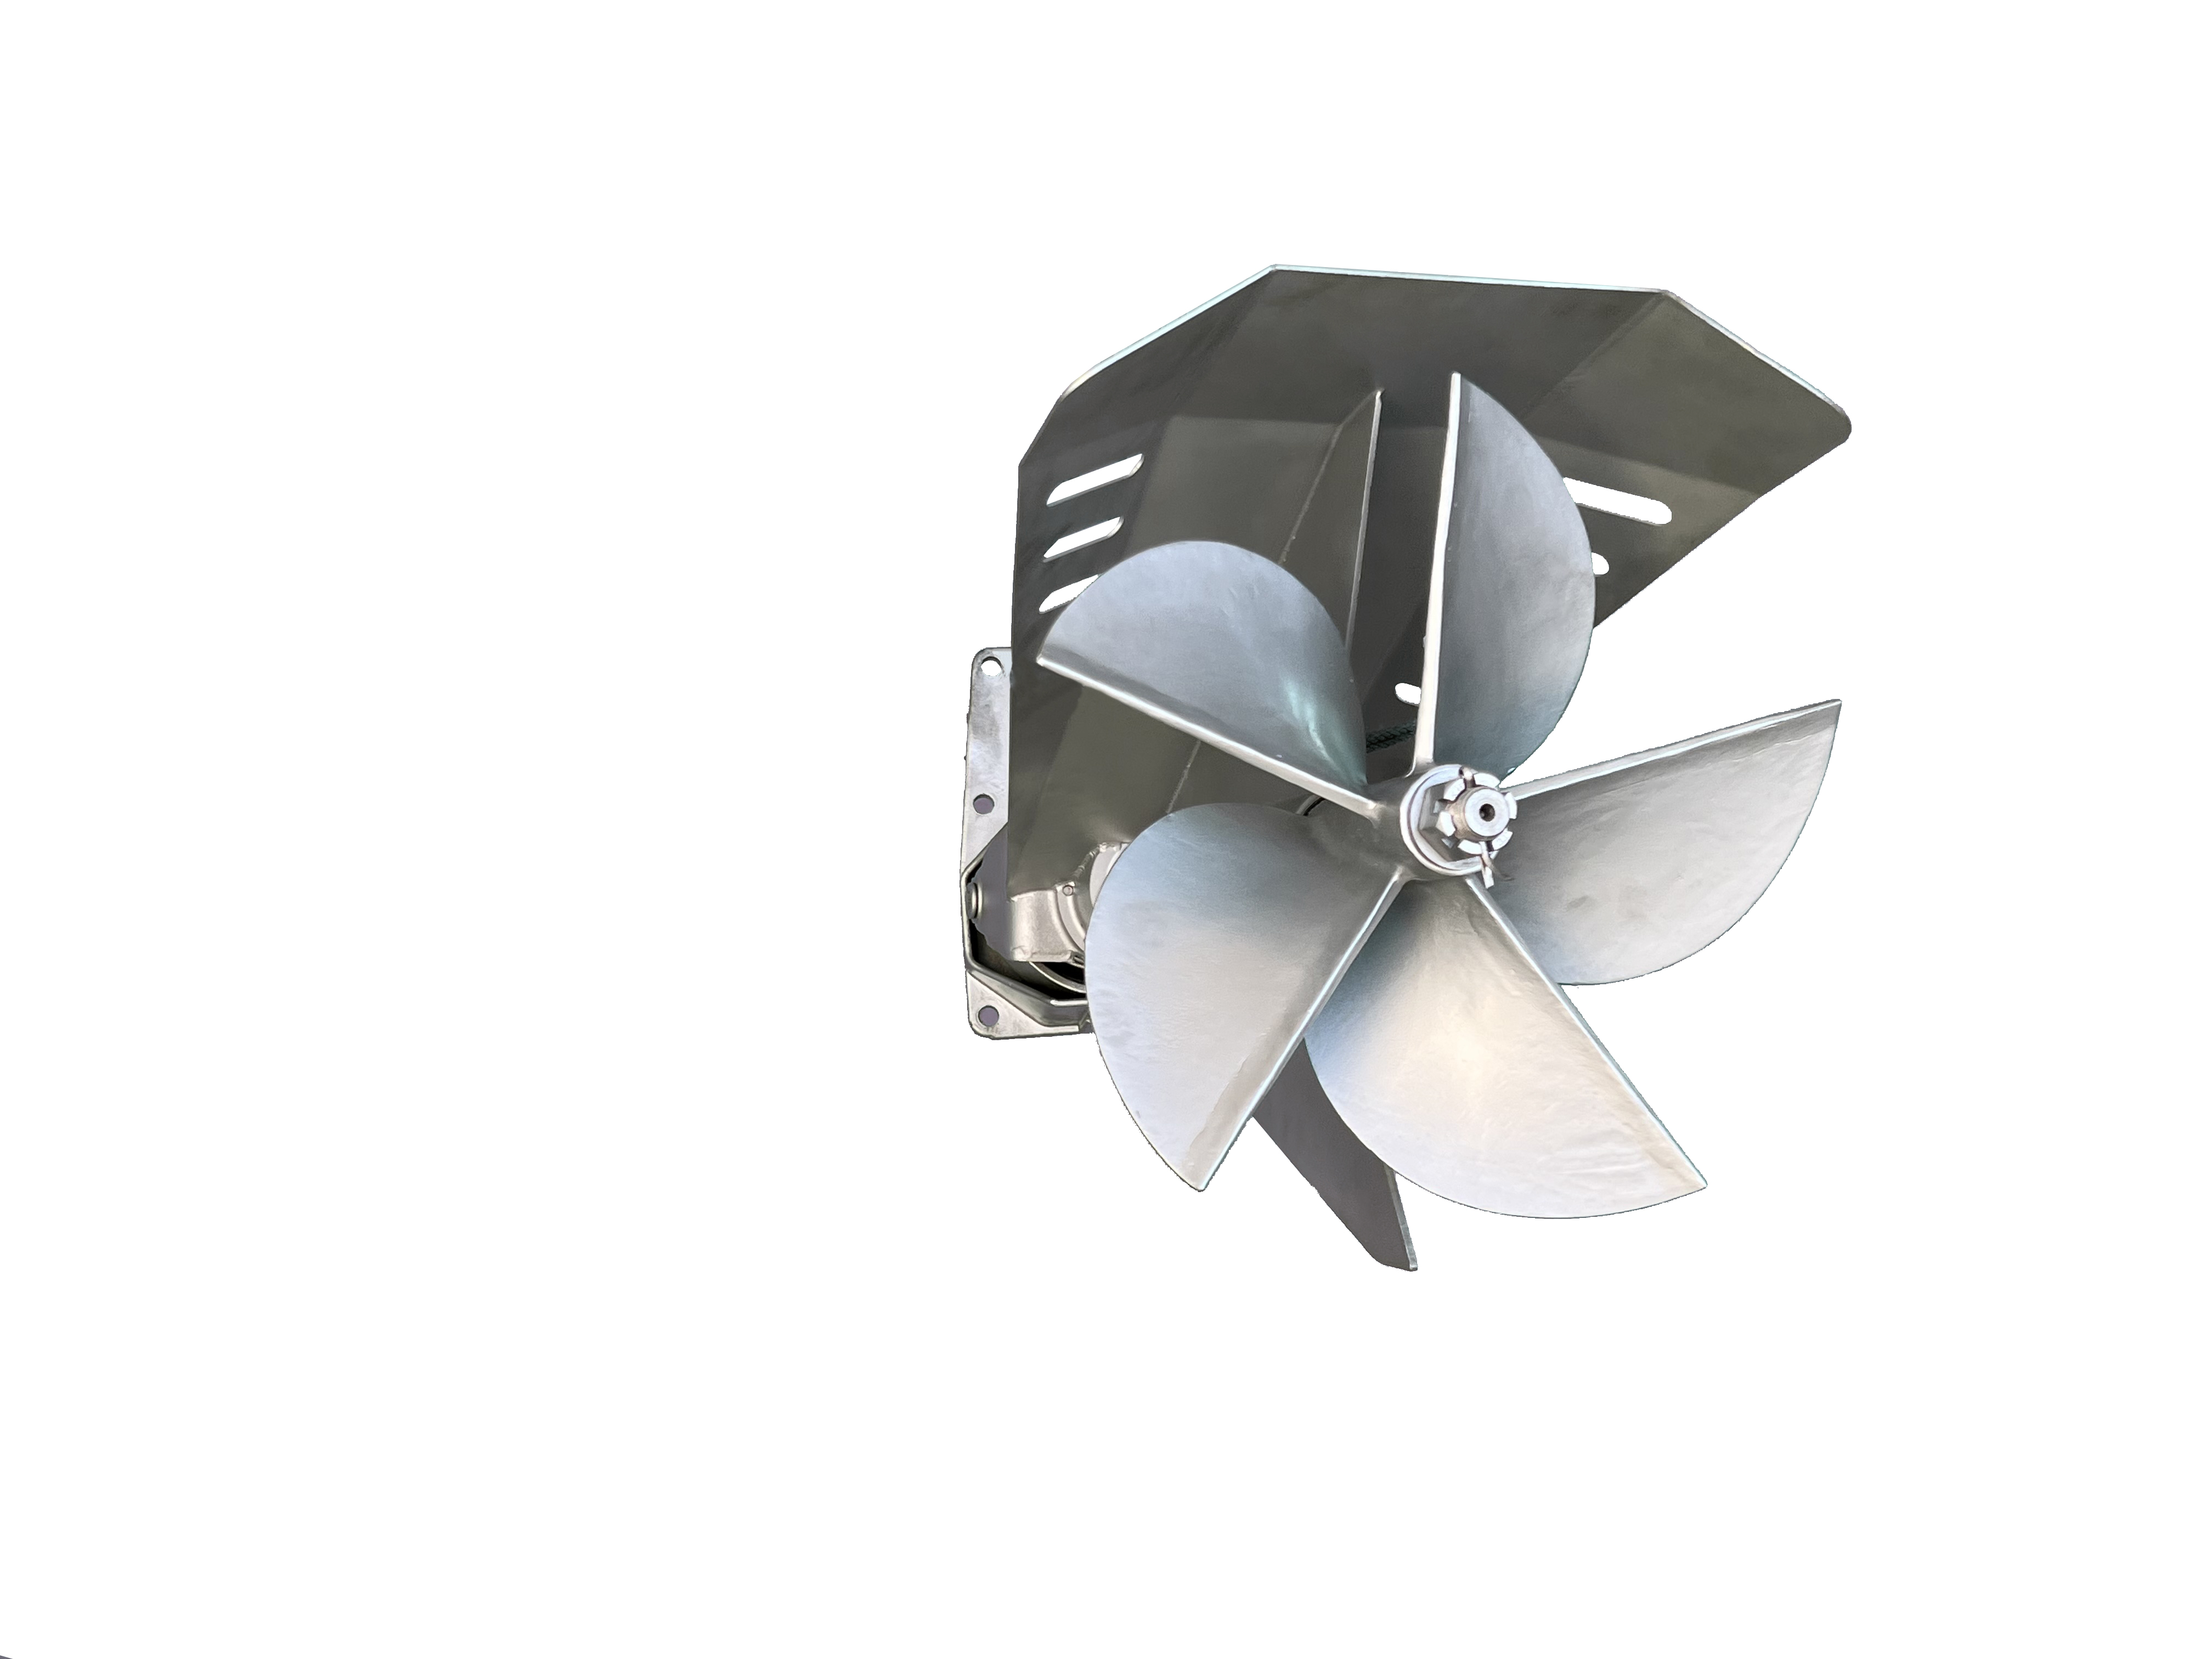 BH400 surface drive propeller